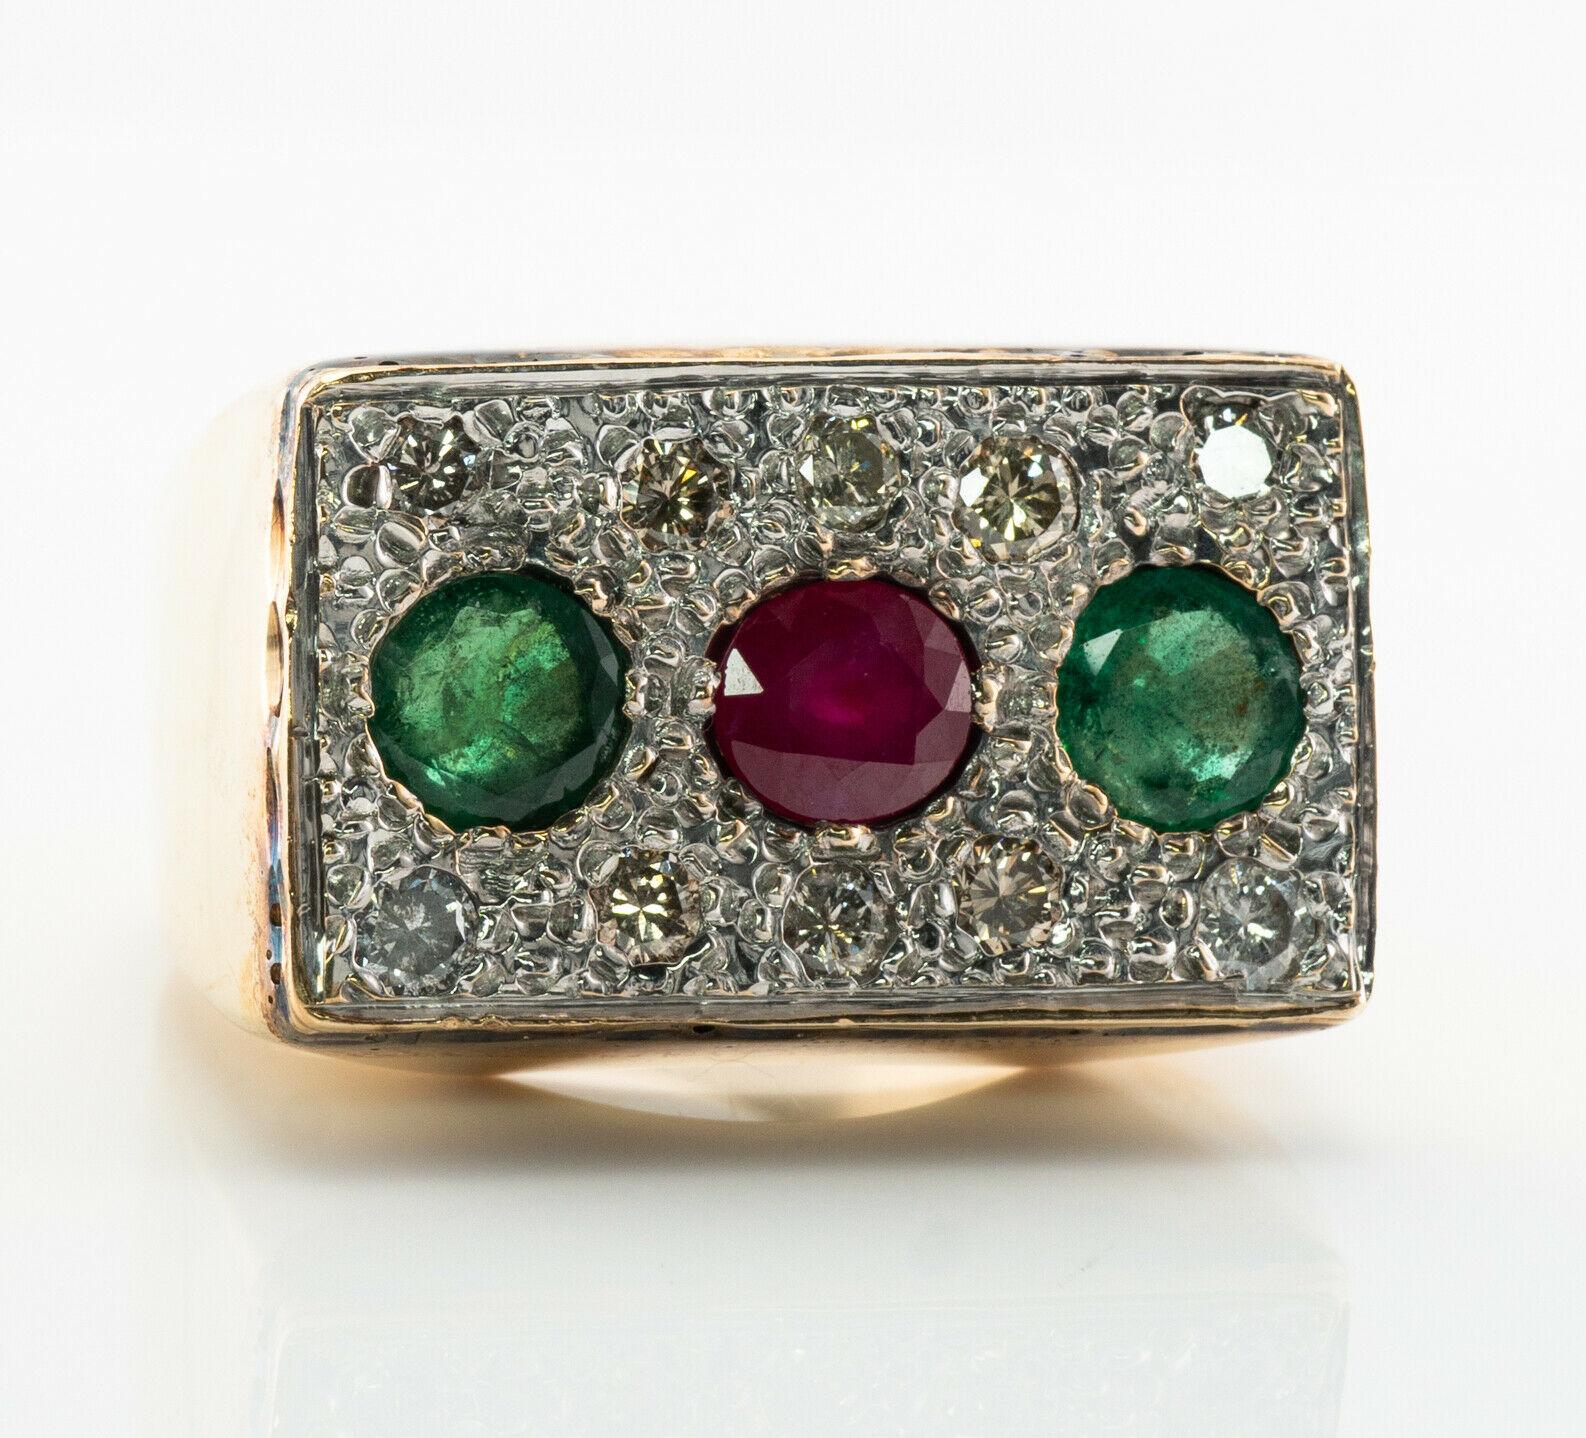 This beautiful vintage ring for a man is finely crafted in solid 14K Yellow gold and White gold for the top. Two 5mm natural Earth mined Emeralds and one 5mm Ruby totaling 1.61 carats. Ten round cut diamonds range from VS2 to SI2 clarity and I to K